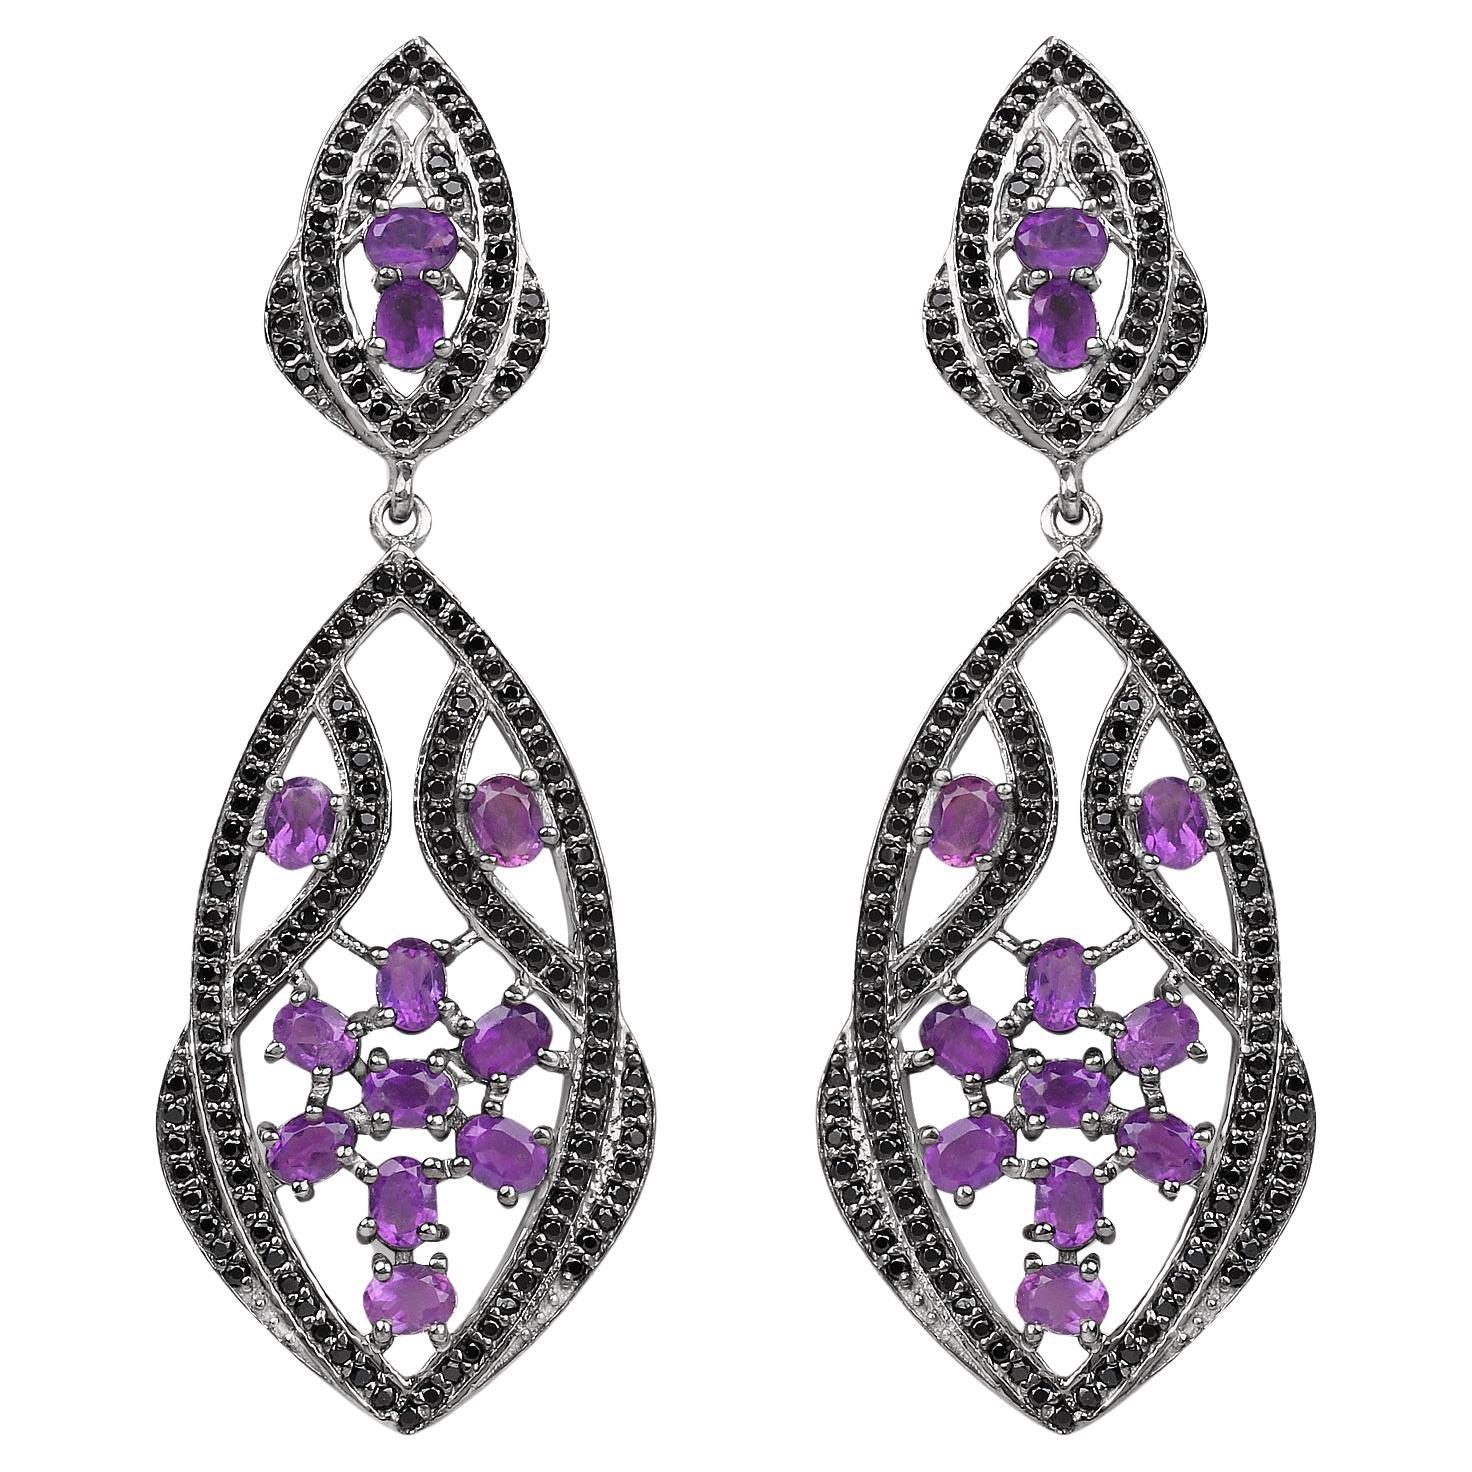 Amethyst Earrings With Black Spinels 5.74 Carats Rhodium Plated Sterling Silver For Sale